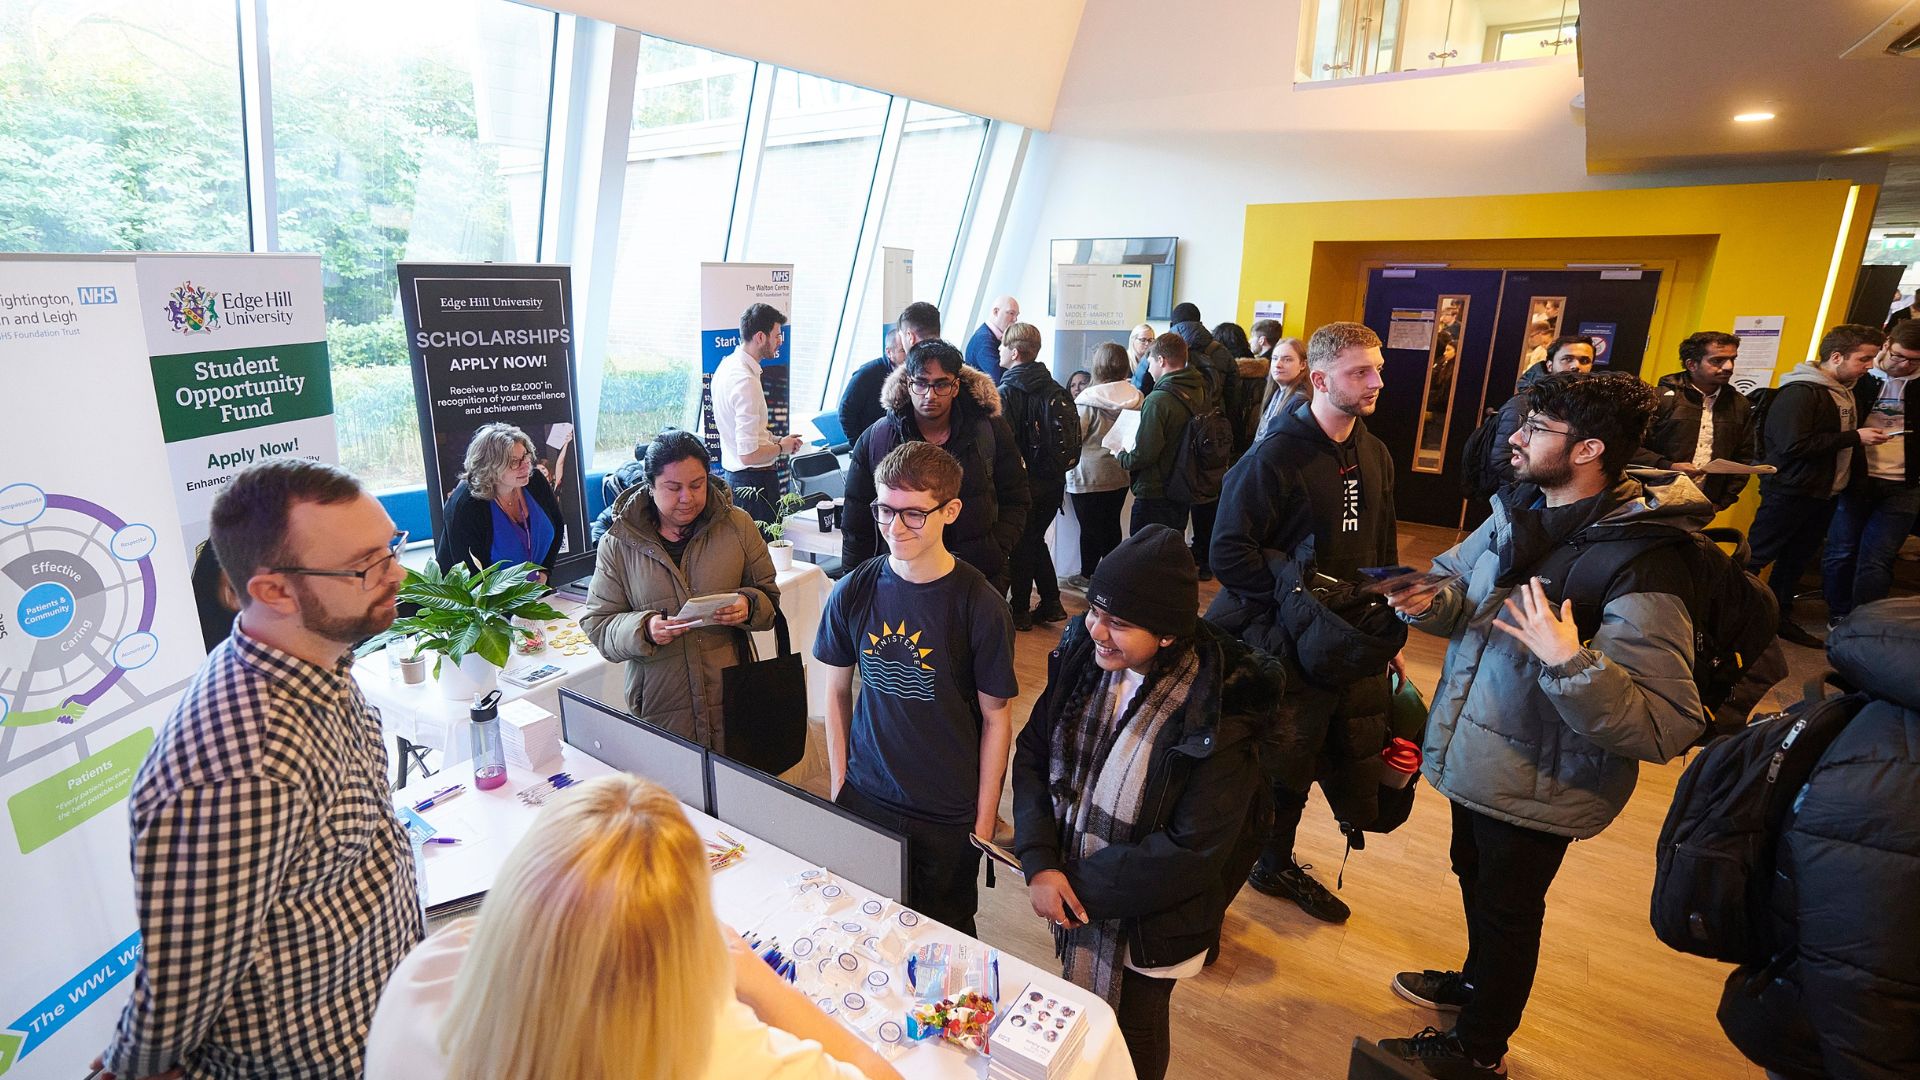 group of students and exhibitors at a busy computer science careers fair in the tech hub